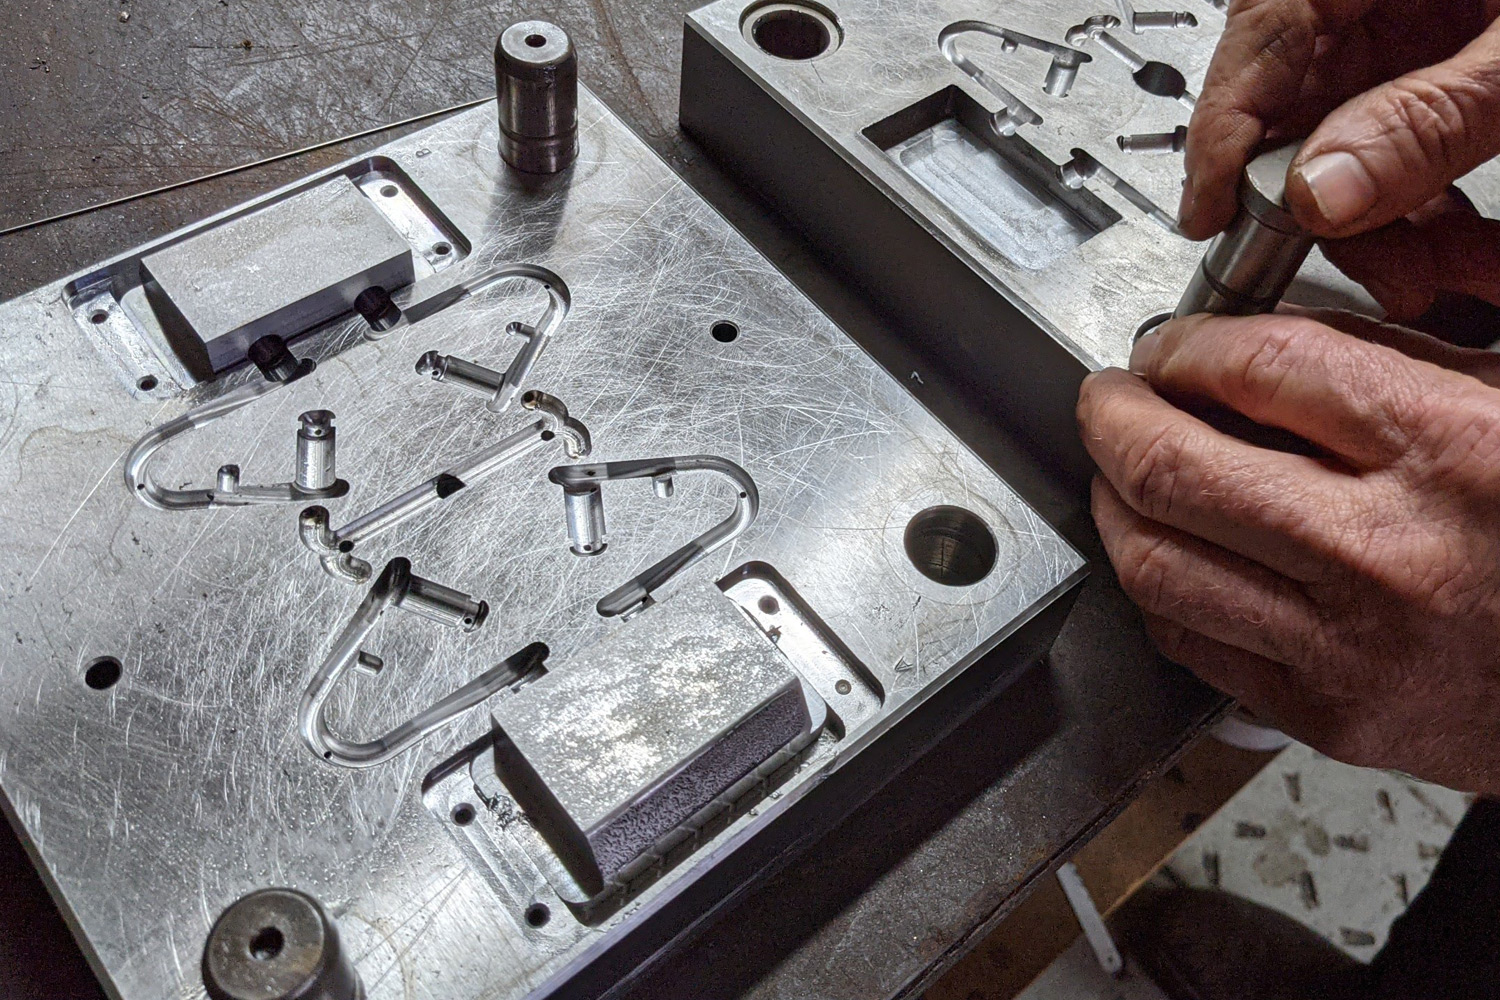 Mike working on injection moulding tool